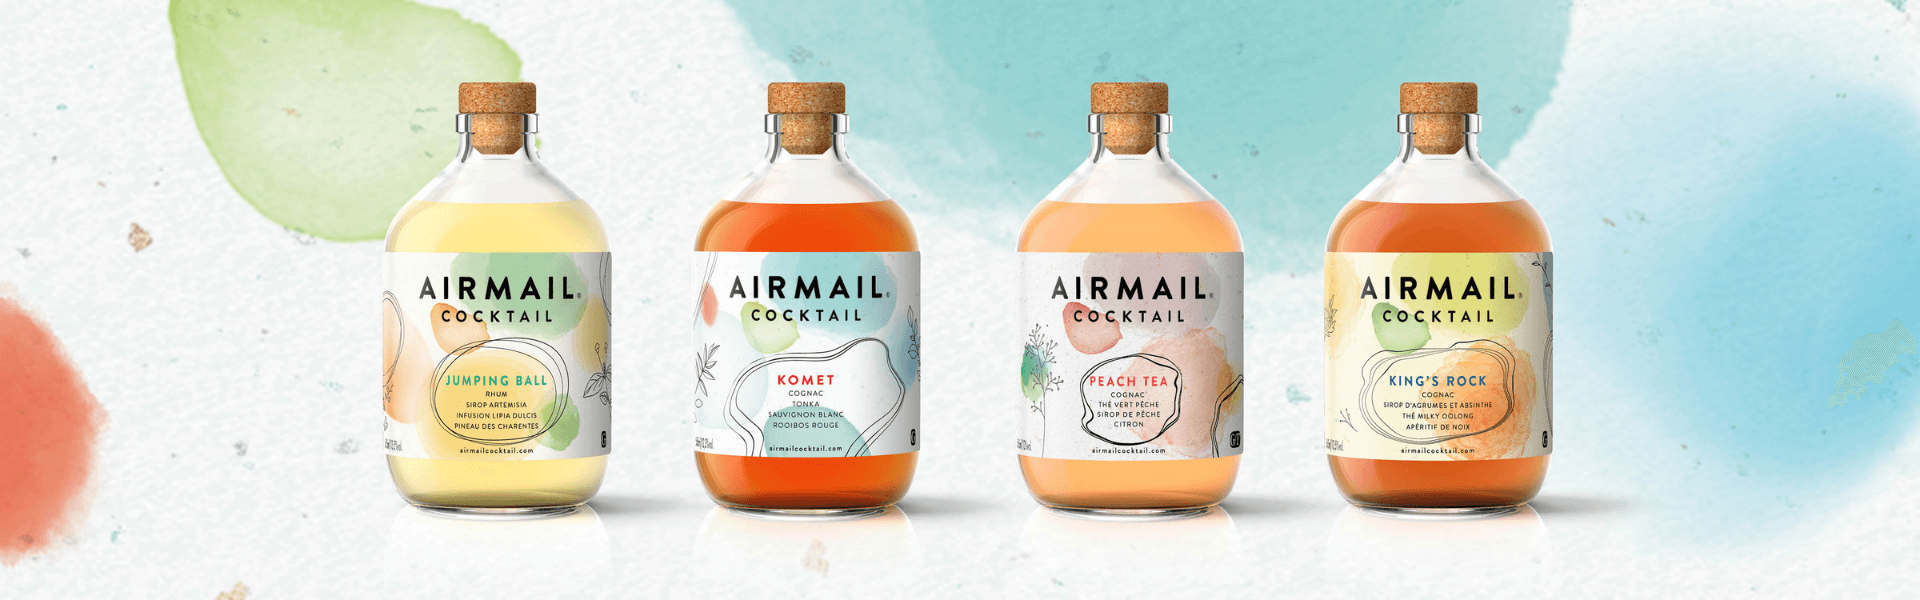 AIRMAIL COCKTAIL